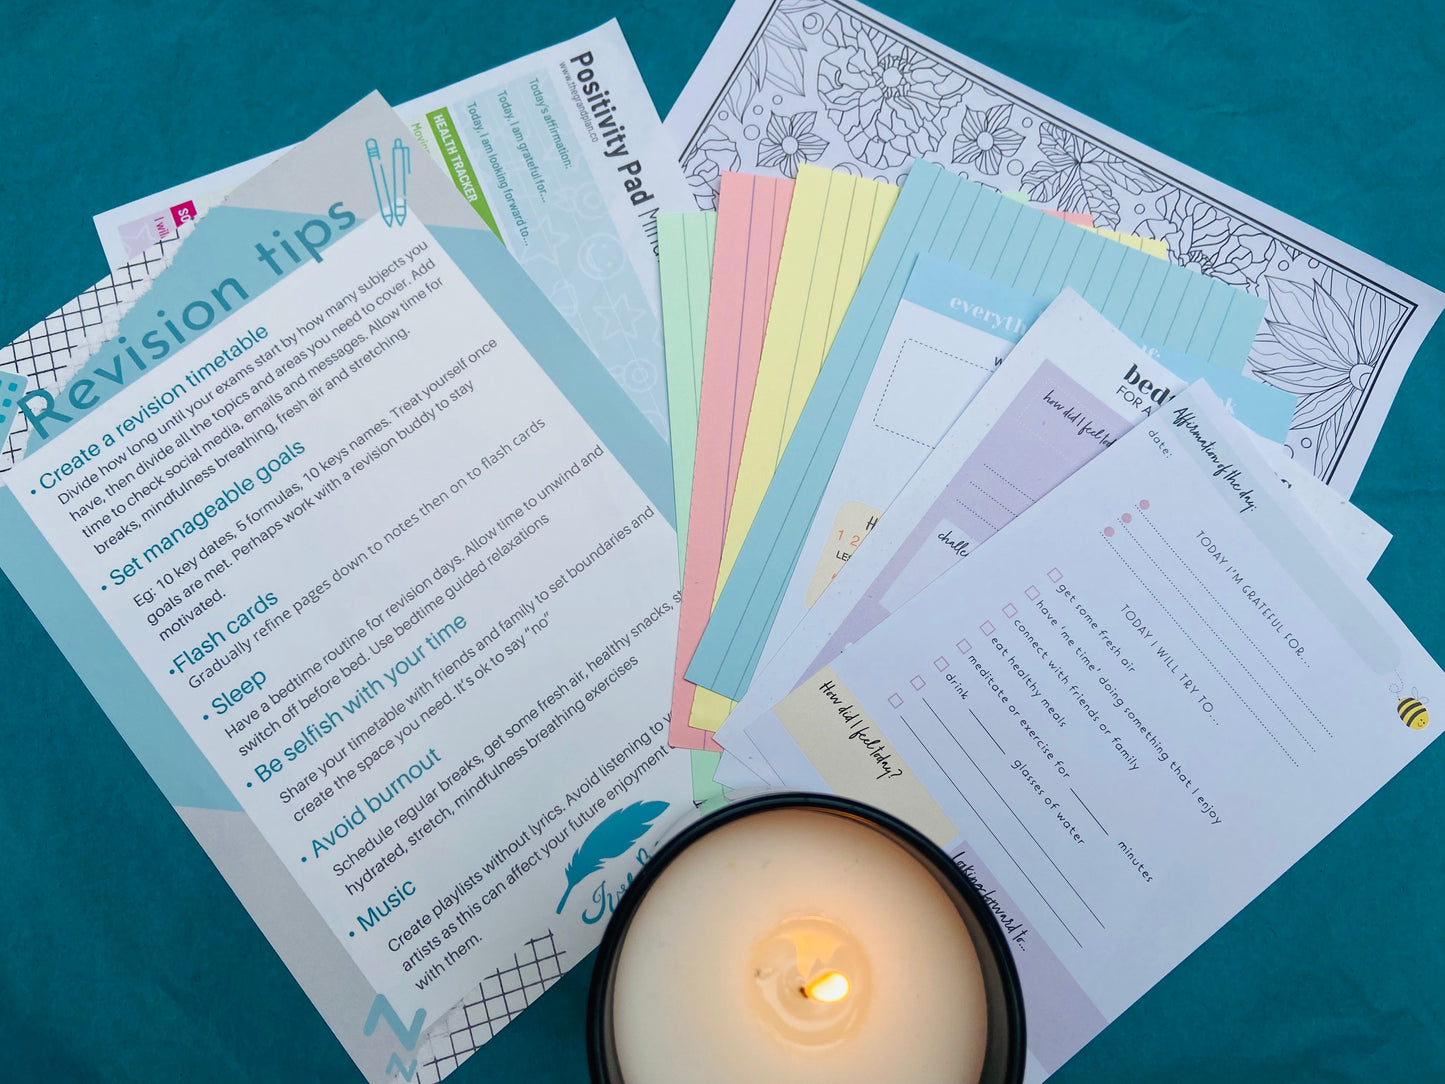 Mindful relaxation revision gift box